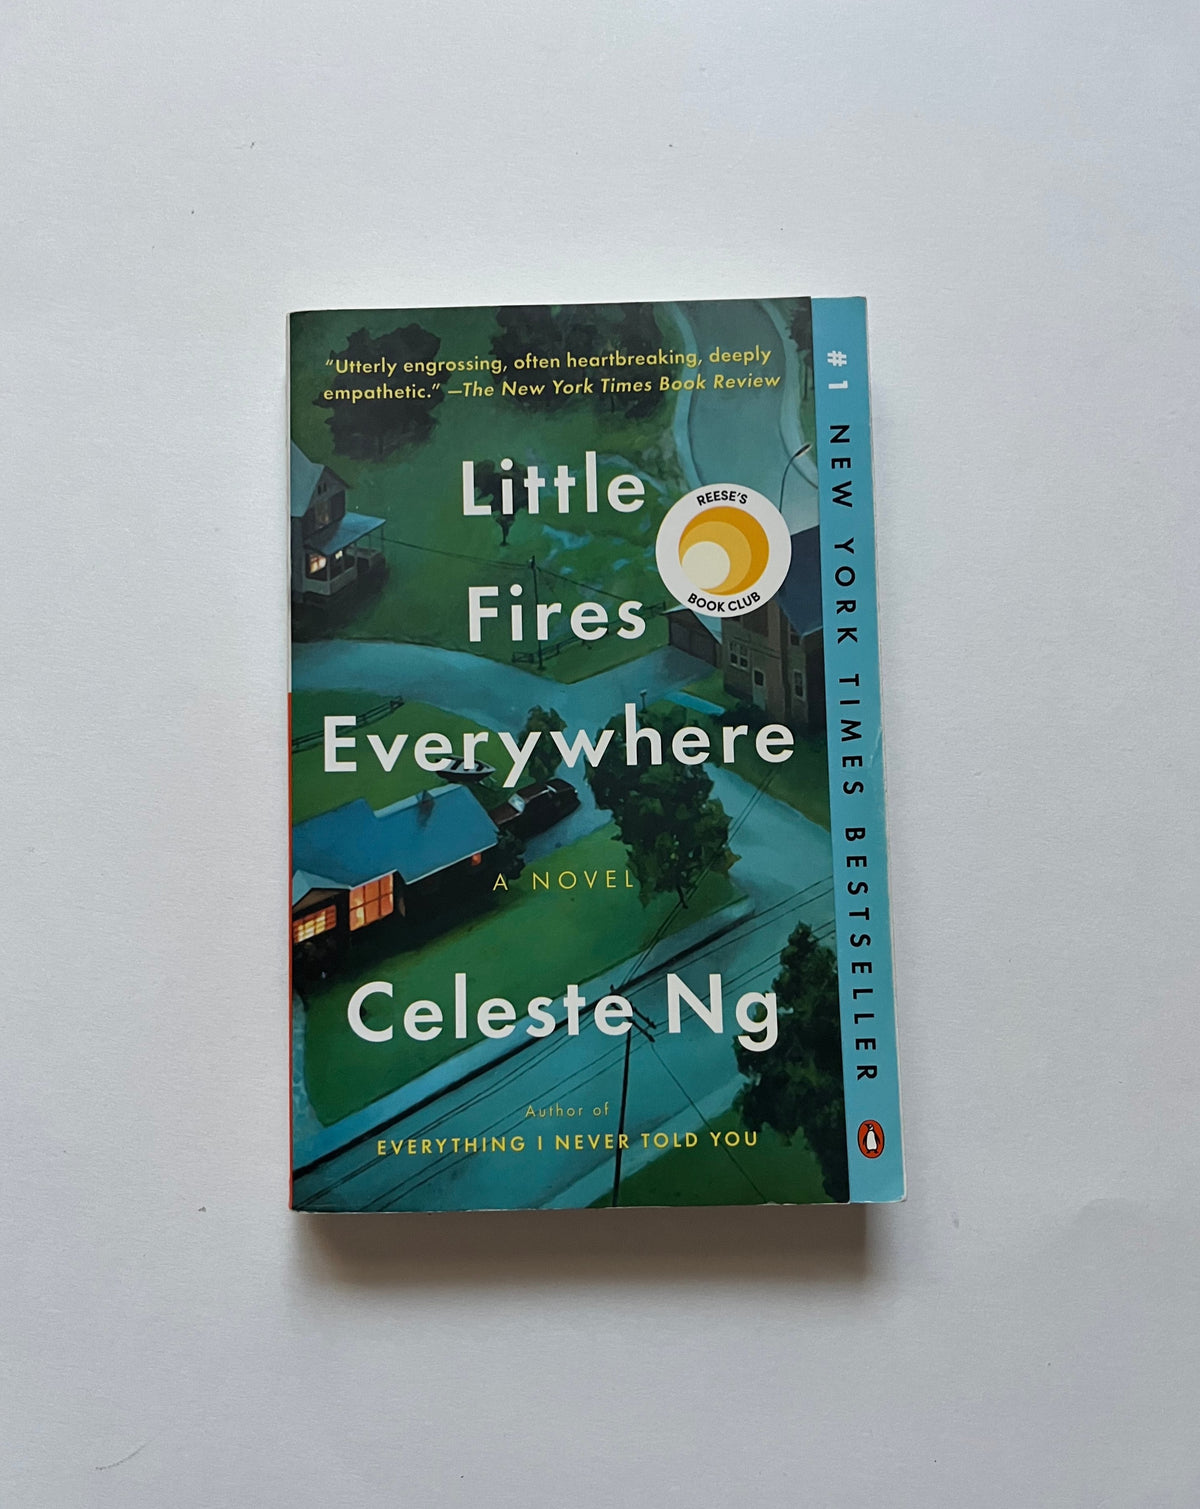 DONATE: Little Fires Everywhere by Celeste Ng